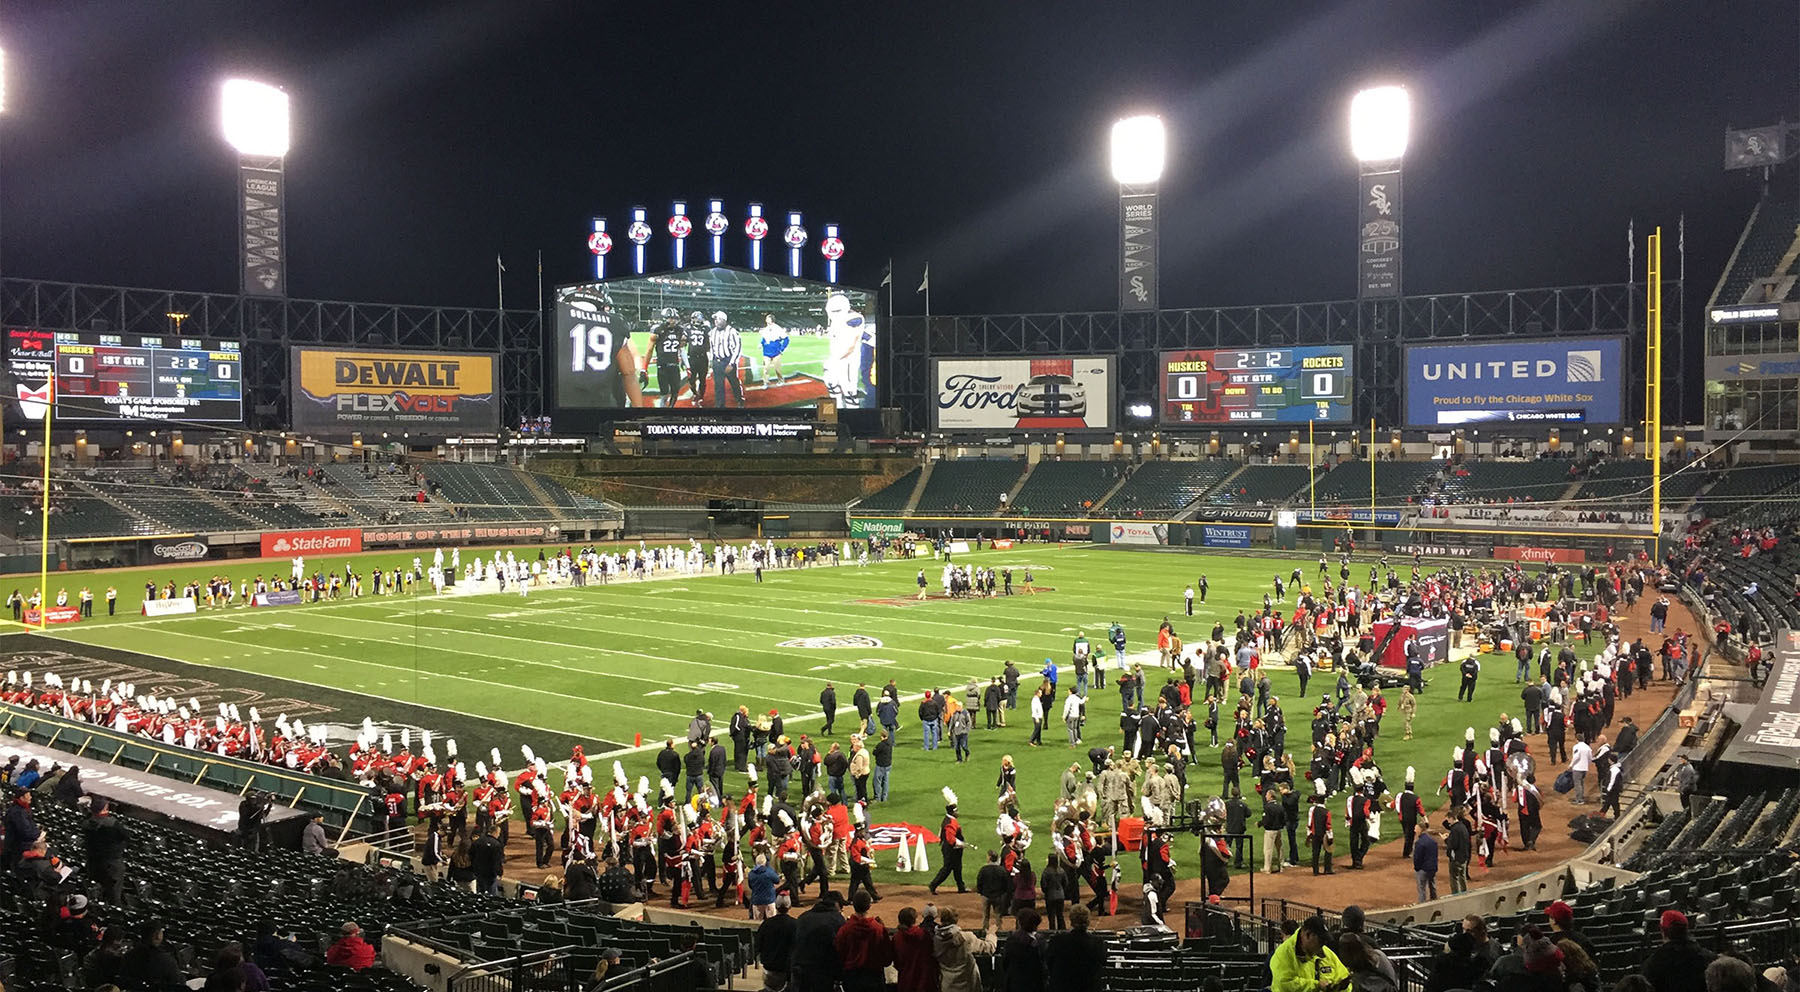 After inaugural football game at Sox park, NIU looks for continued